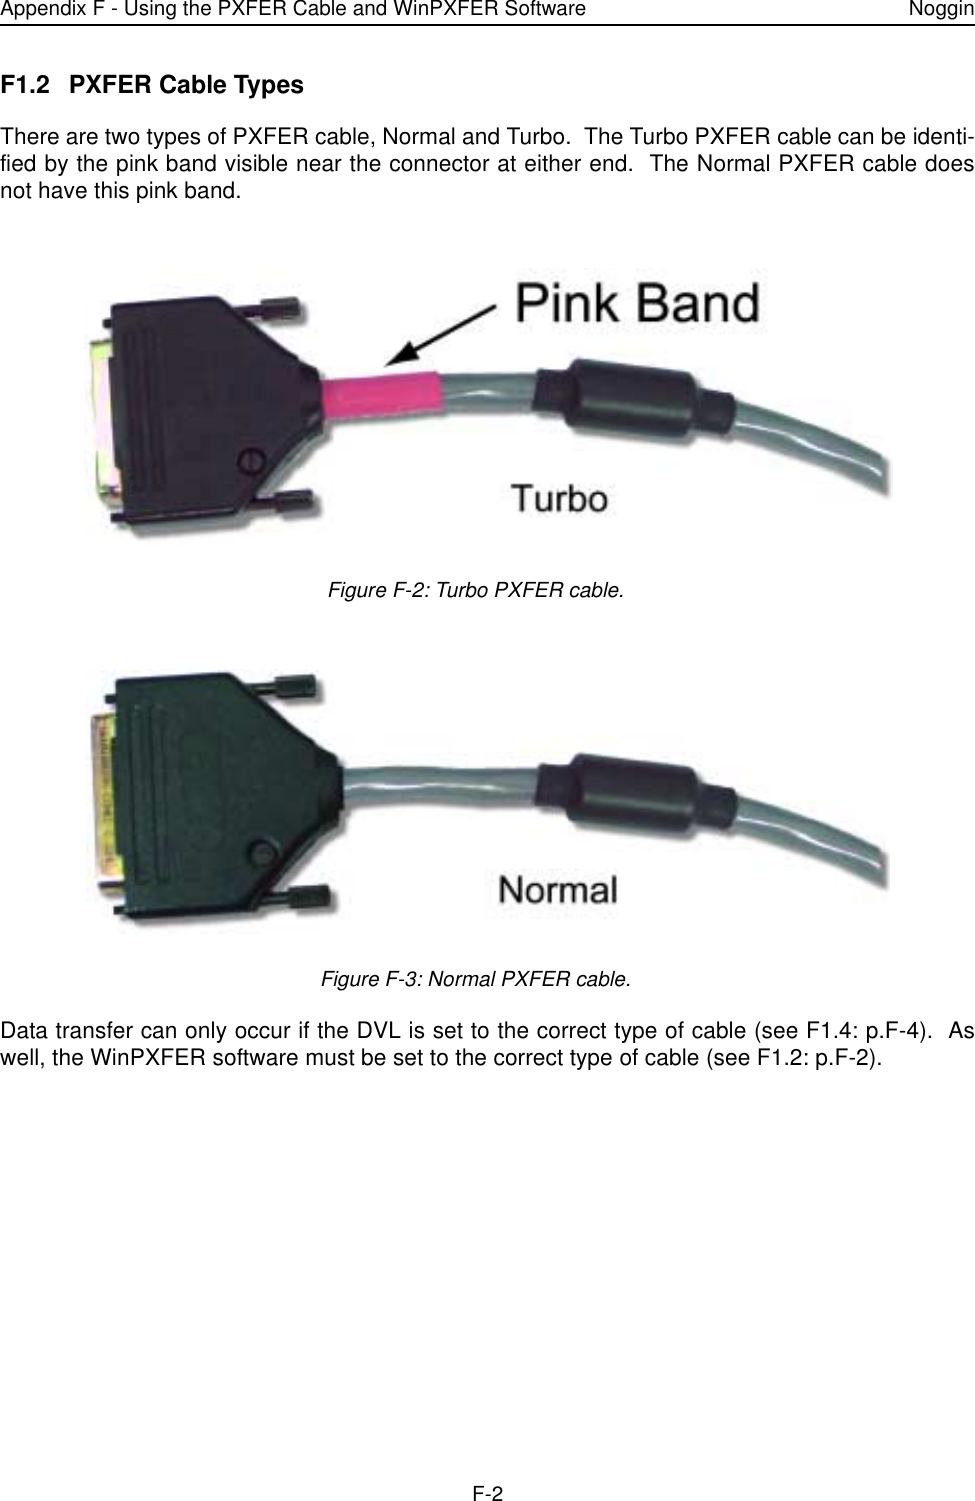 Appendix F - Using the PXFER Cable and WinPXFER Software NogginF-2F1.2 PXFER Cable TypesThere are two types of PXFER cable, Normal and Turbo.  The Turbo PXFER cable can be identi-fied by the pink band visible near the connector at either end.  The Normal PXFER cable doesnot have this pink band.   Figure F-2: Turbo PXFER cable. Figure F-3: Normal PXFER cable.Data transfer can only occur if the DVL is set to the correct type of cable (see F1.4: p.F-4).  Aswell, the WinPXFER software must be set to the correct type of cable (see F1.2: p.F-2).